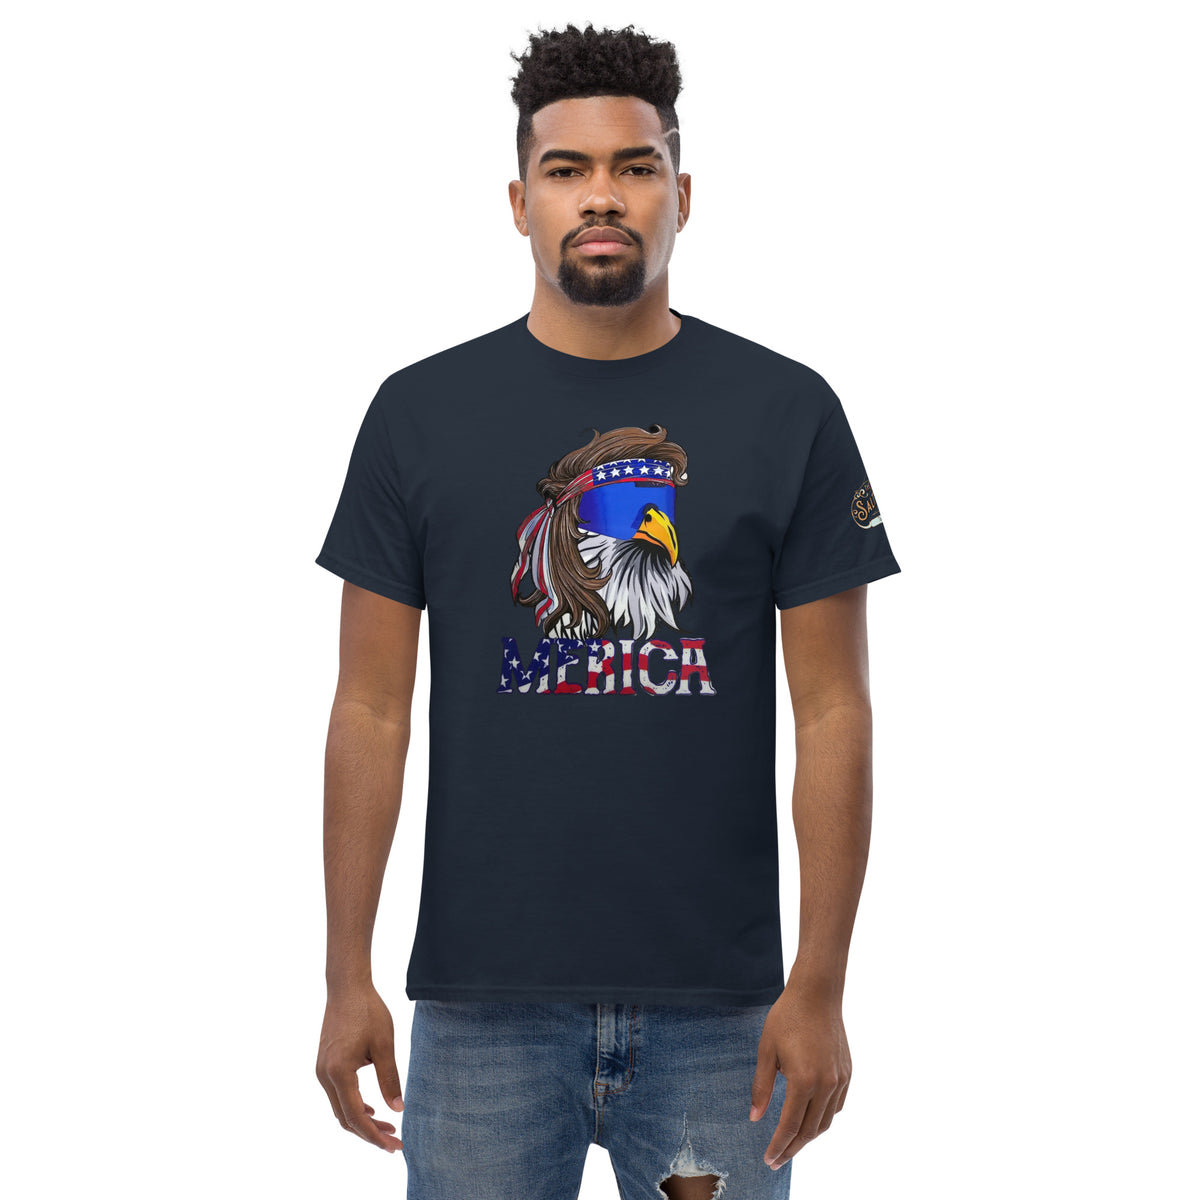 The Salty Medic Clothing Co proudly presents the "Freedom Eagle" T-shirt